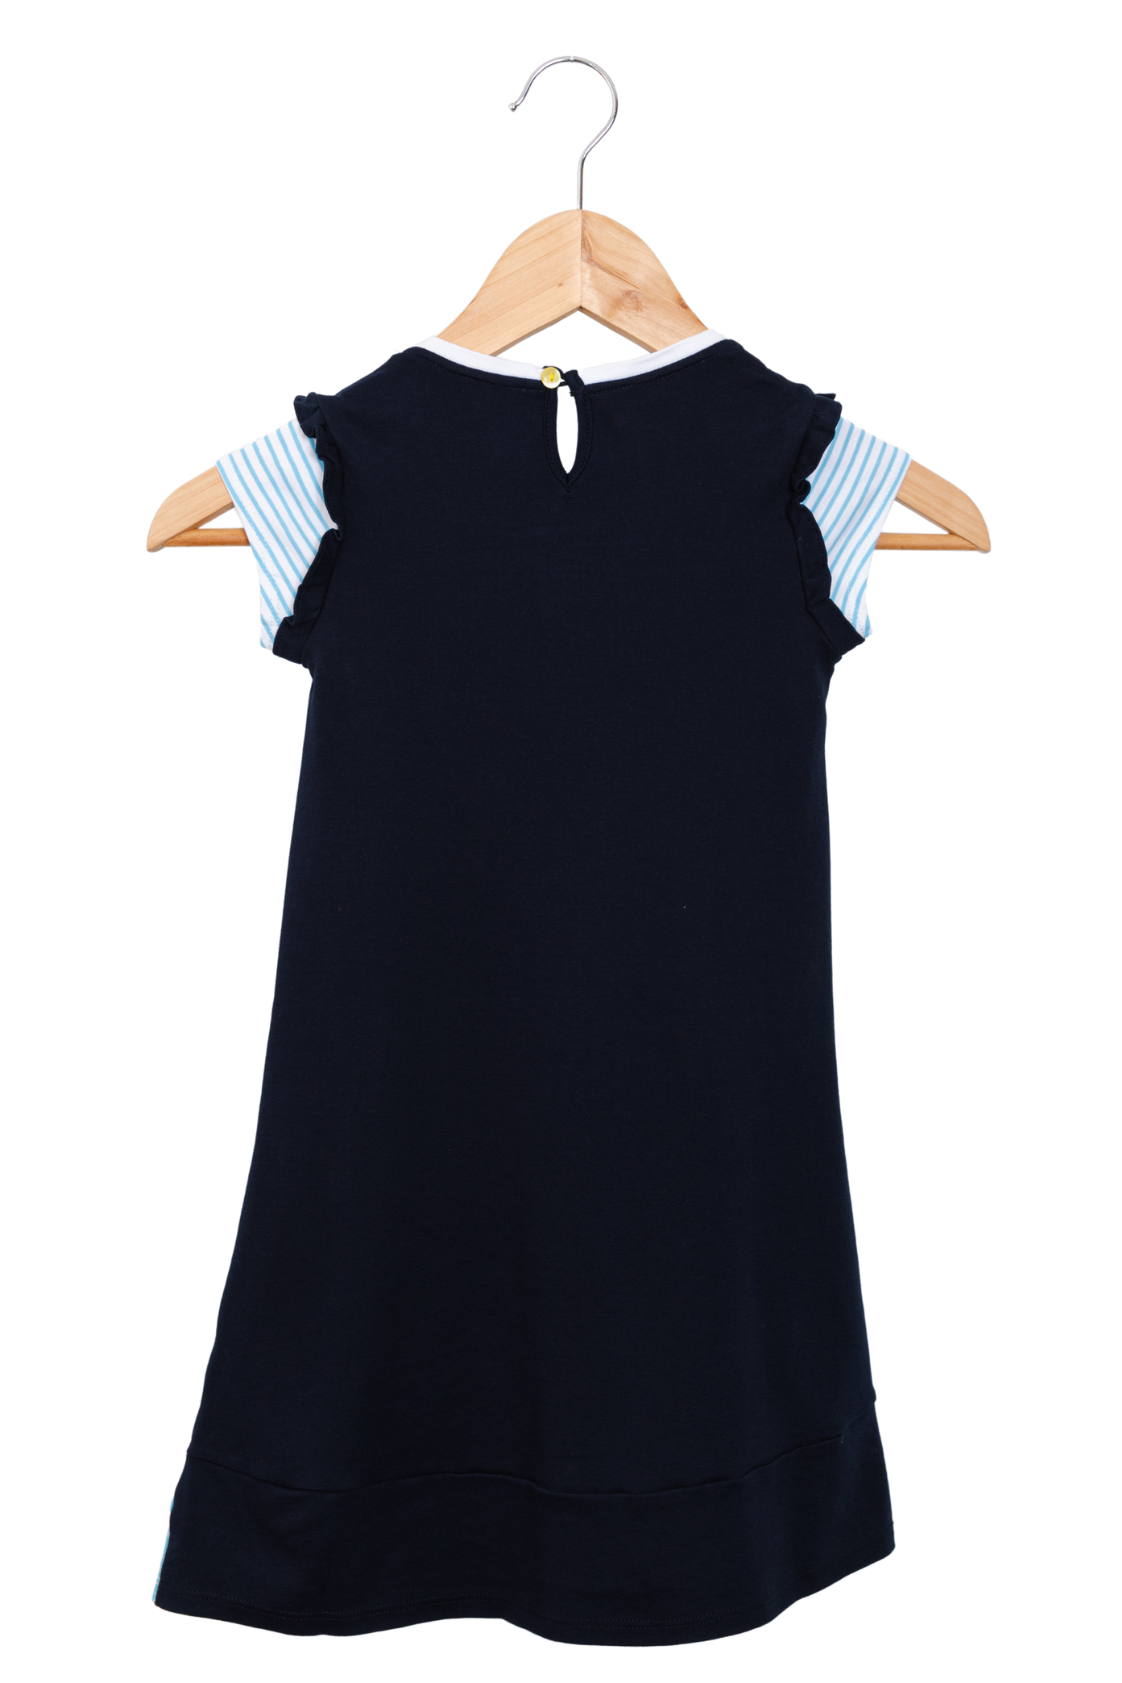 Children's Clothing, girl dresses, ethical and eco-friendly clothes ...